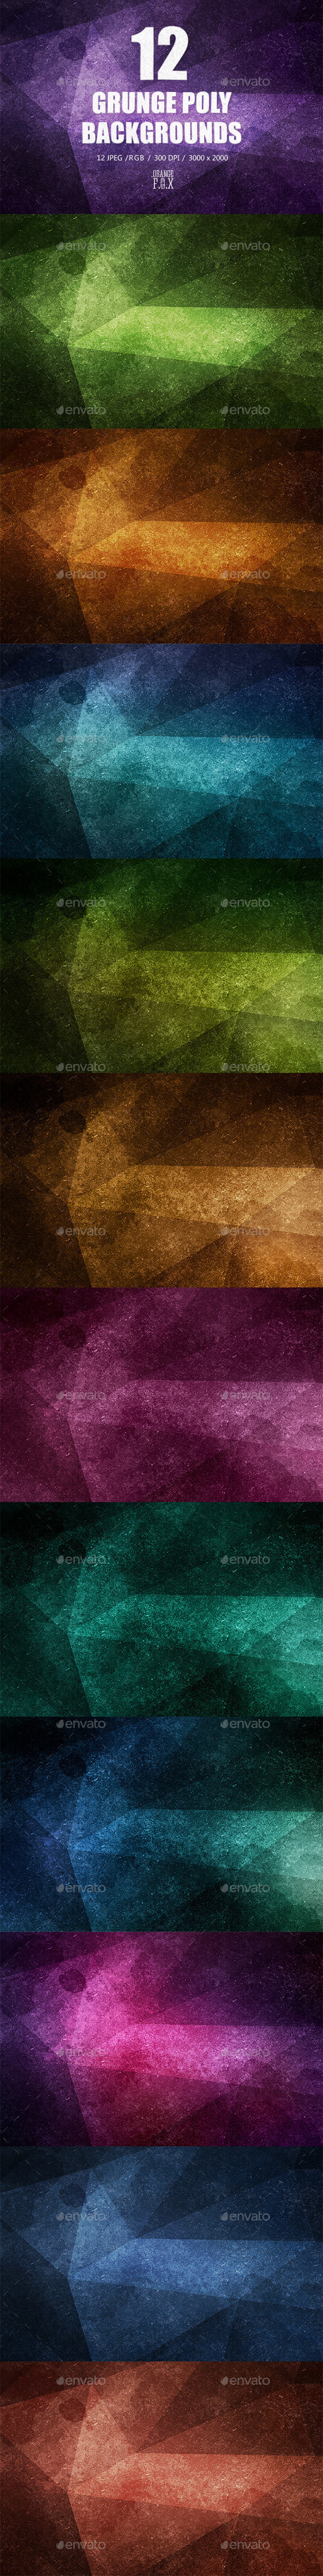 12 20grunge 20poly 20backgrounds preview